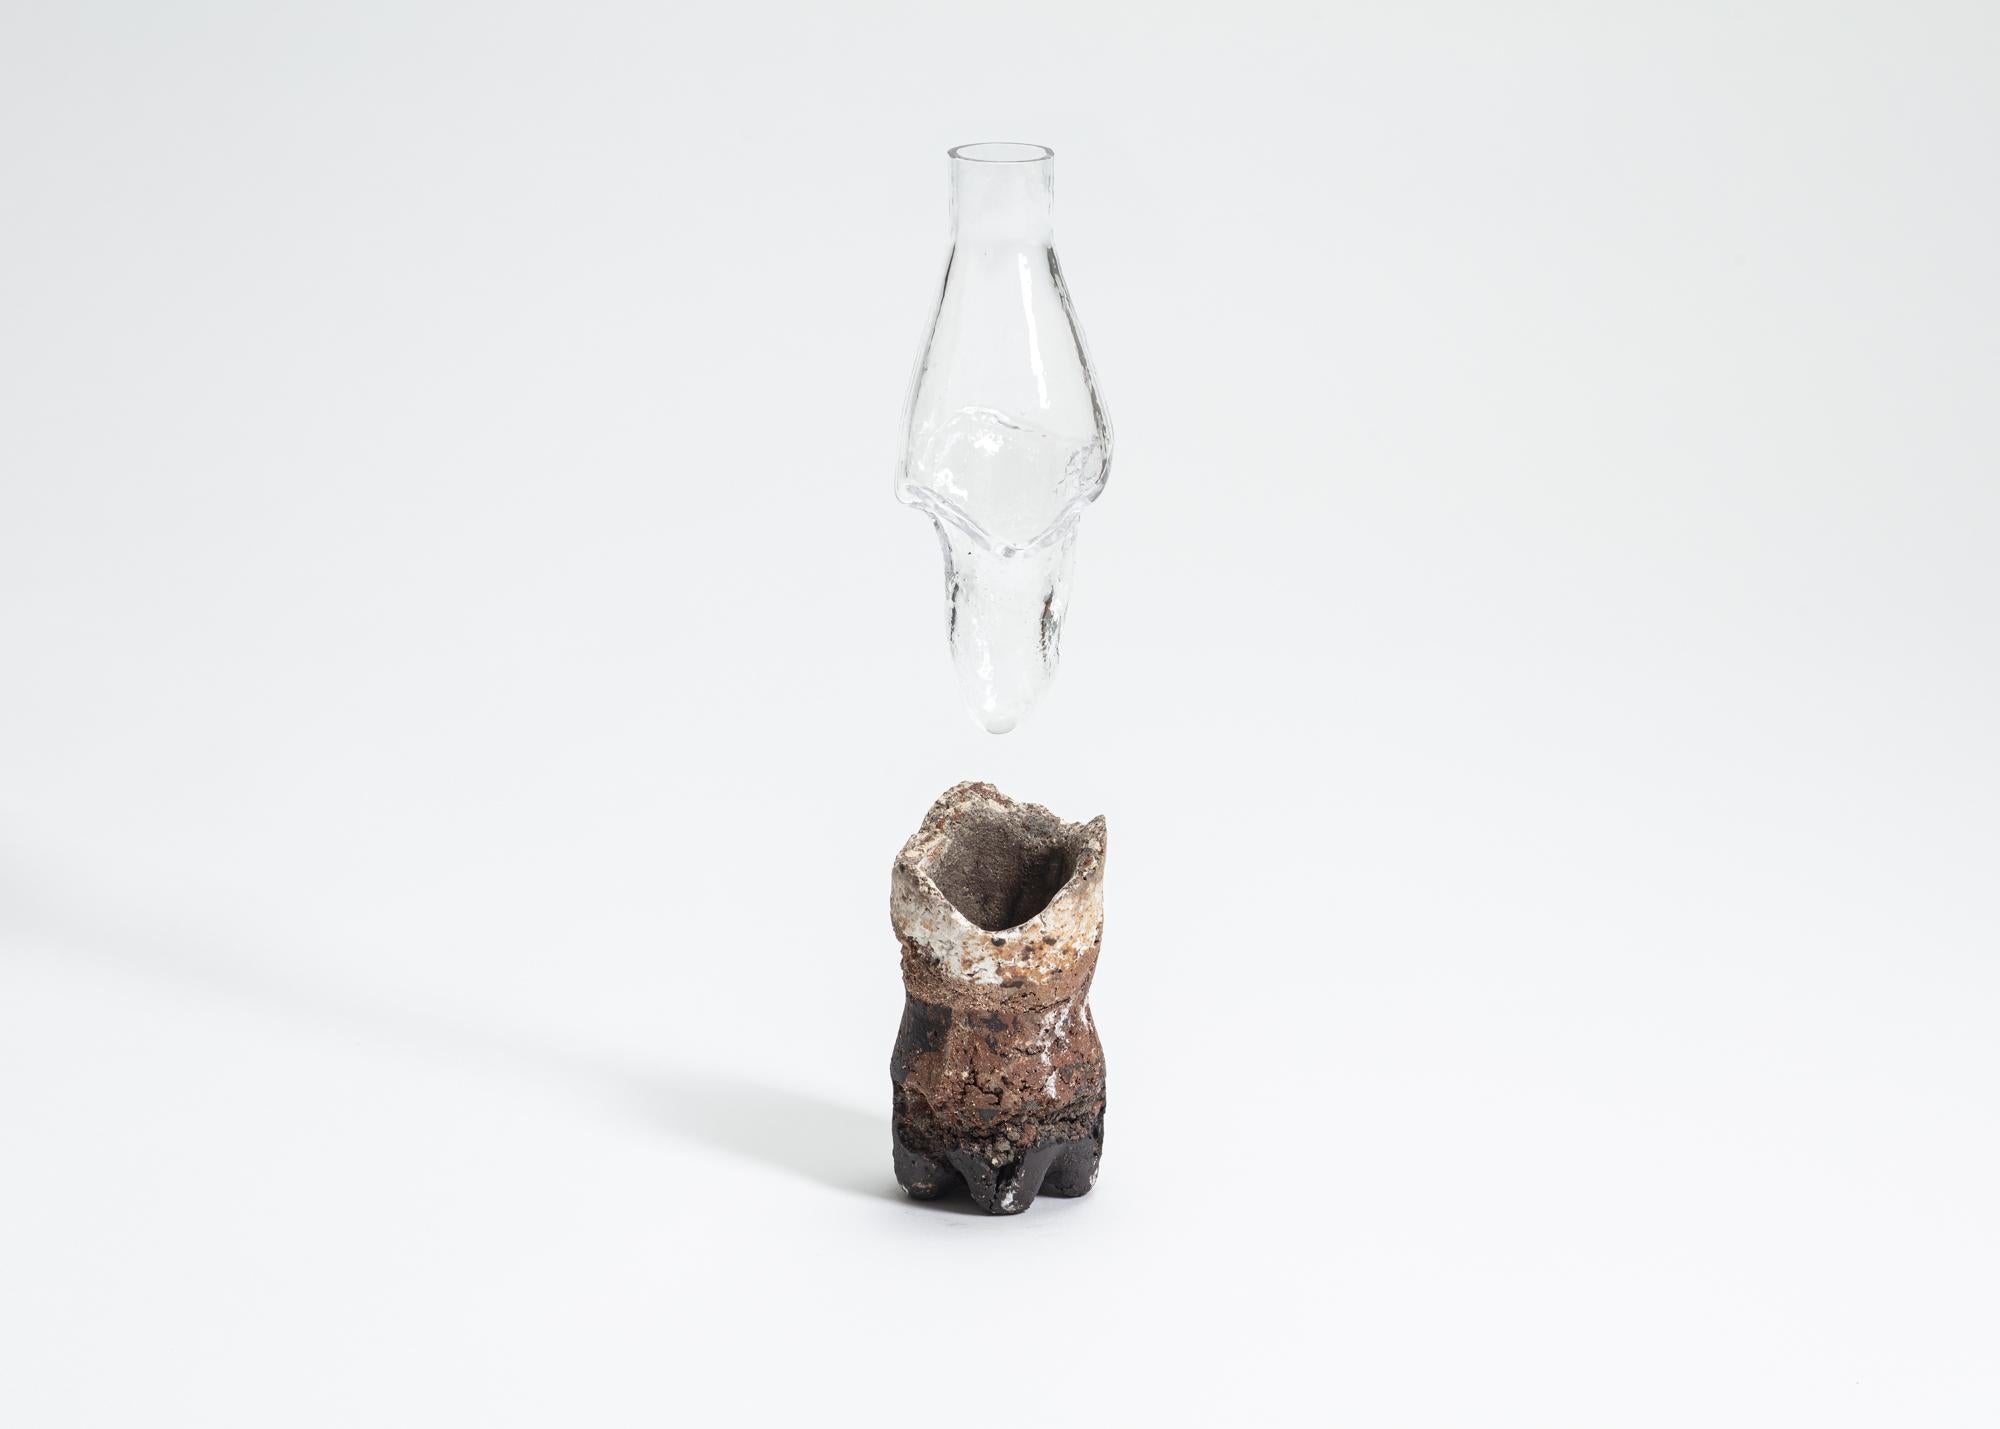 FUWA FUWA, No 2 bottle by Yusuke´ Y. Offhause
One of a Kind, the work is in two parts (ceramic and glass).
Dimensions: D 6.5 x W 6.5 x H 21 cm.
Materials: stoneware, porcelain, glass.

Yusuke´ Y. Offhause:
